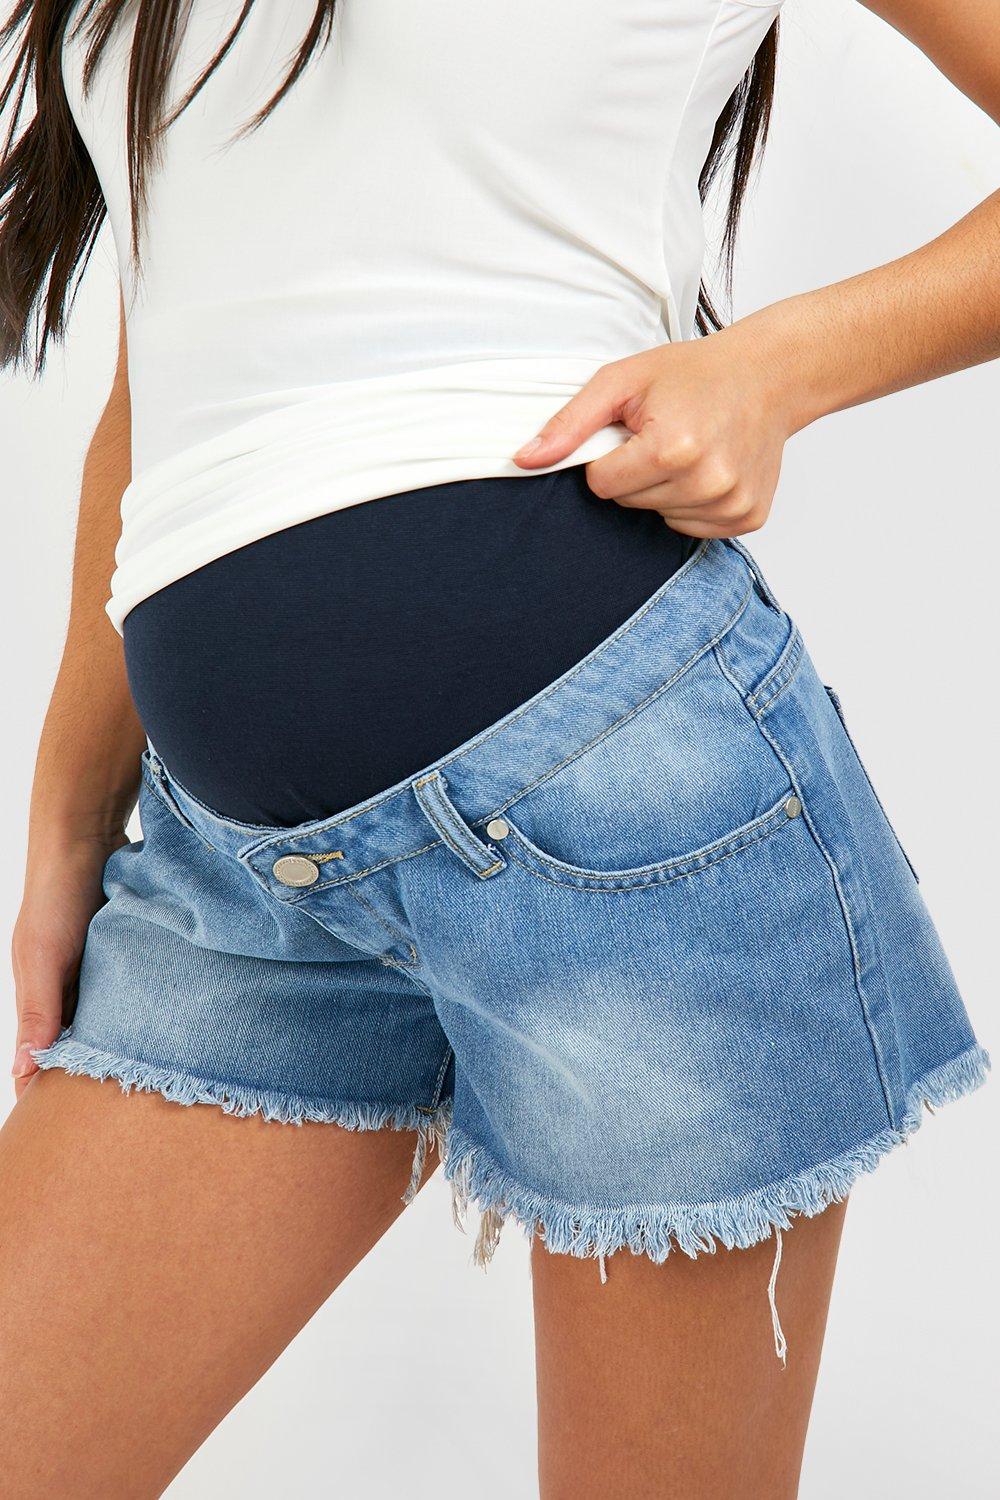 Over & Under Bump Maternity Jeans & Jean Shorts